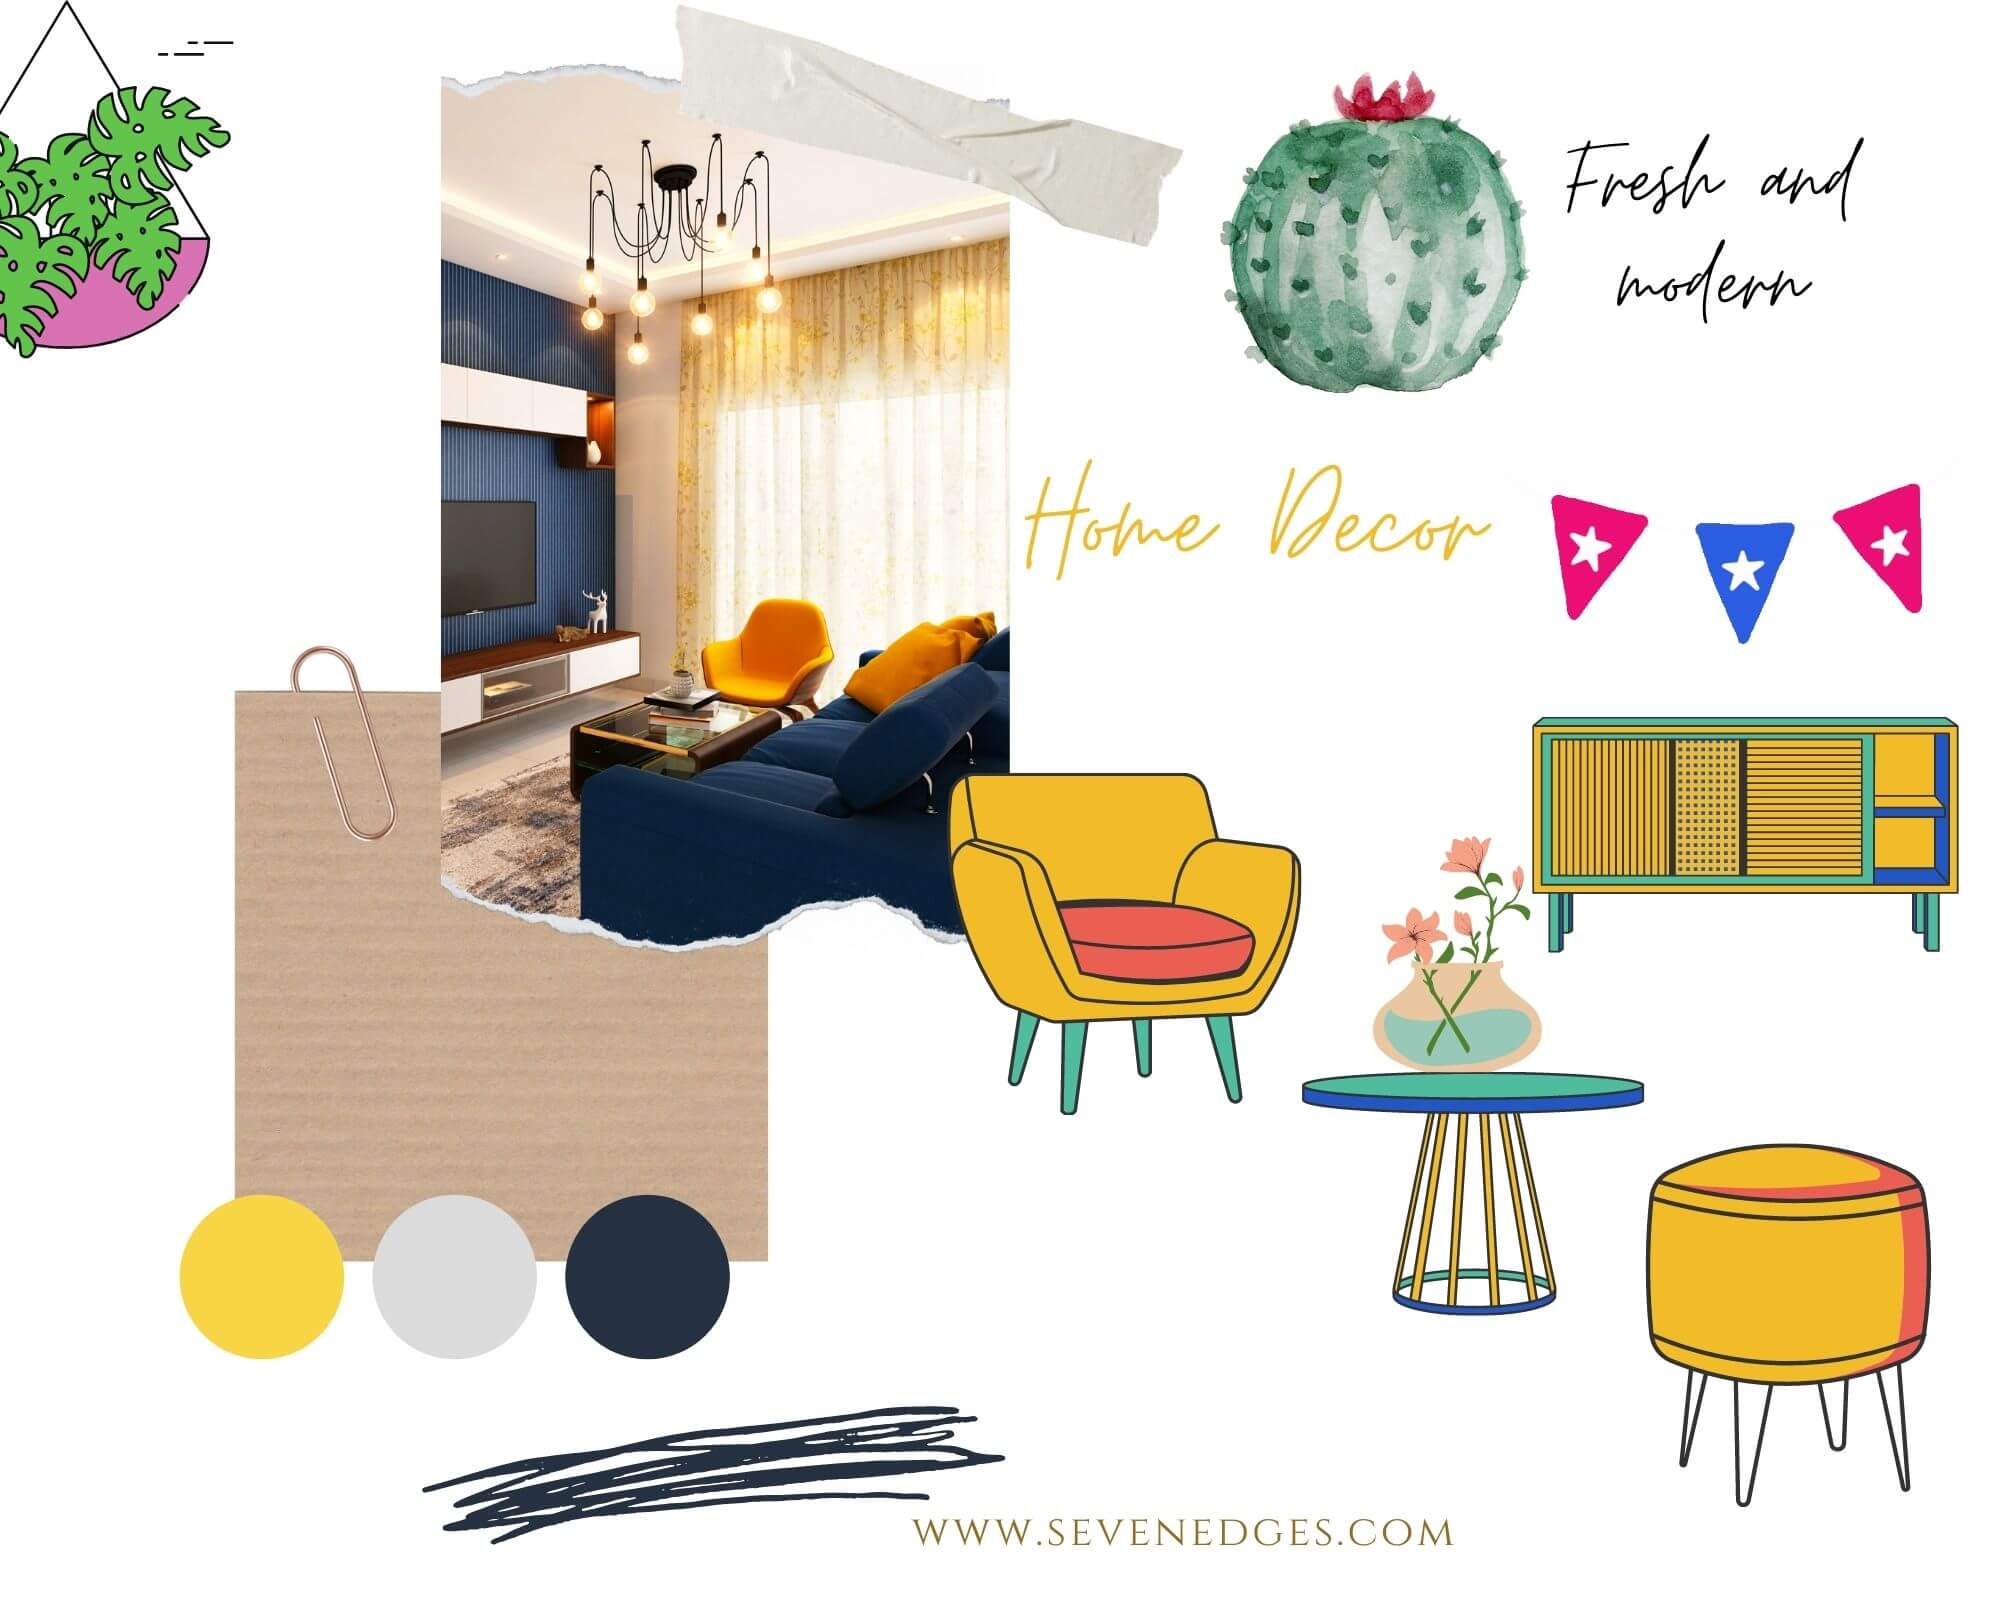 Online Décor Stores You Can Rely On - Sevenedges